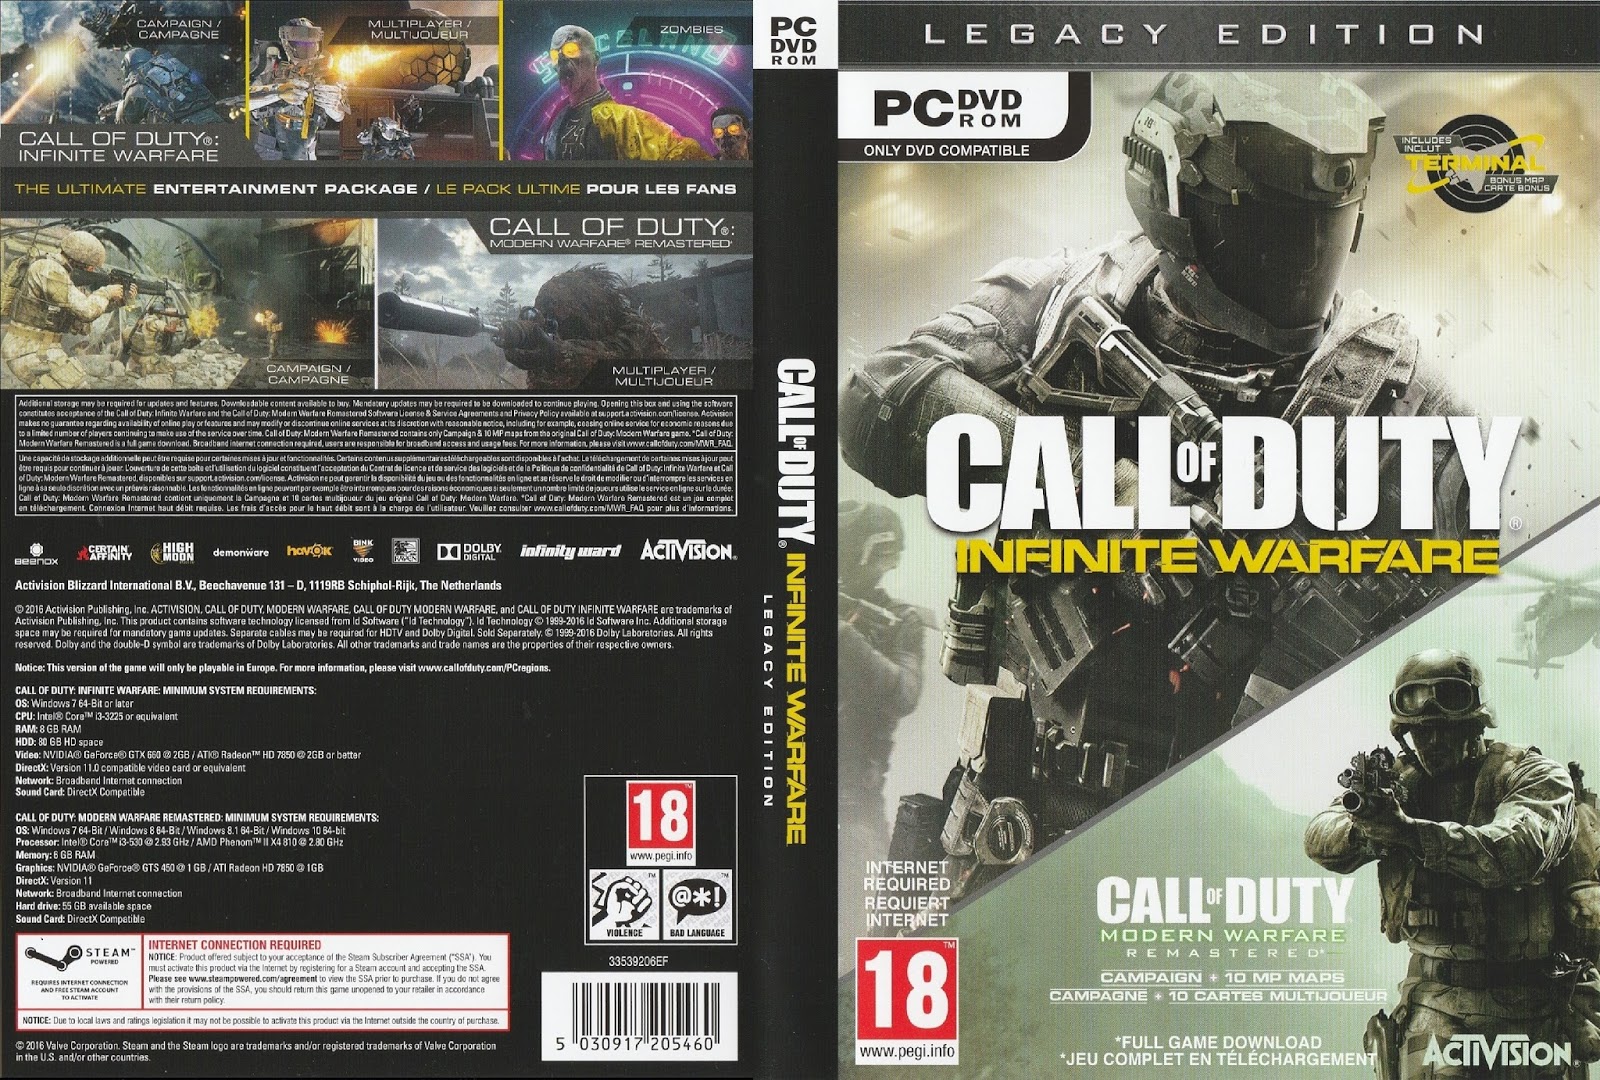 Call of duty 3 ошибка. Call of Duty Infinity Warfare ps4 диск. Call of Duty Infinite Warfare обложка ps4. Call of Duty Infinite Warfare диск PC. Call of Duty Modern Warfare 3 диск PC.